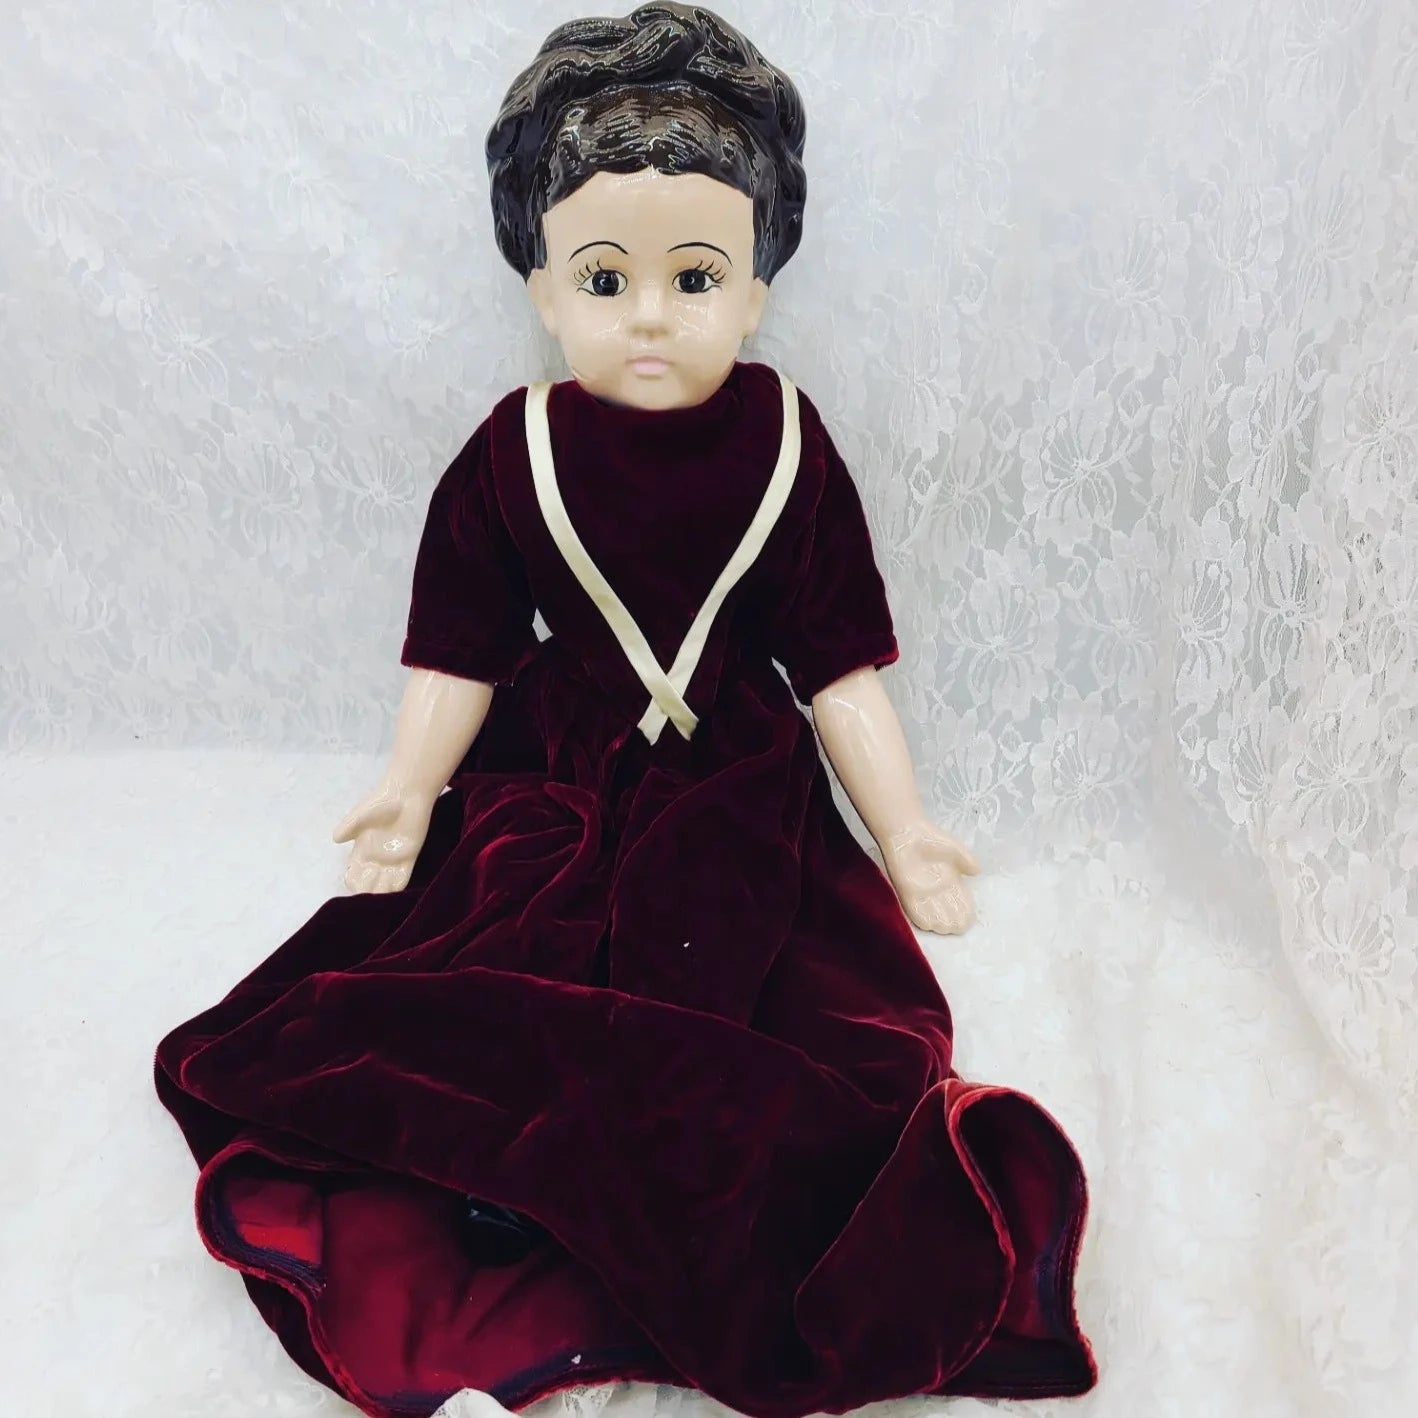 Jane Haunted Doll ~ 26" BIG Handmade Glazed Bisque French Doll Vessel ~ Adult Woman Spirit ~ Paranormal ~ Mysterious Death ~ Unfinished Business